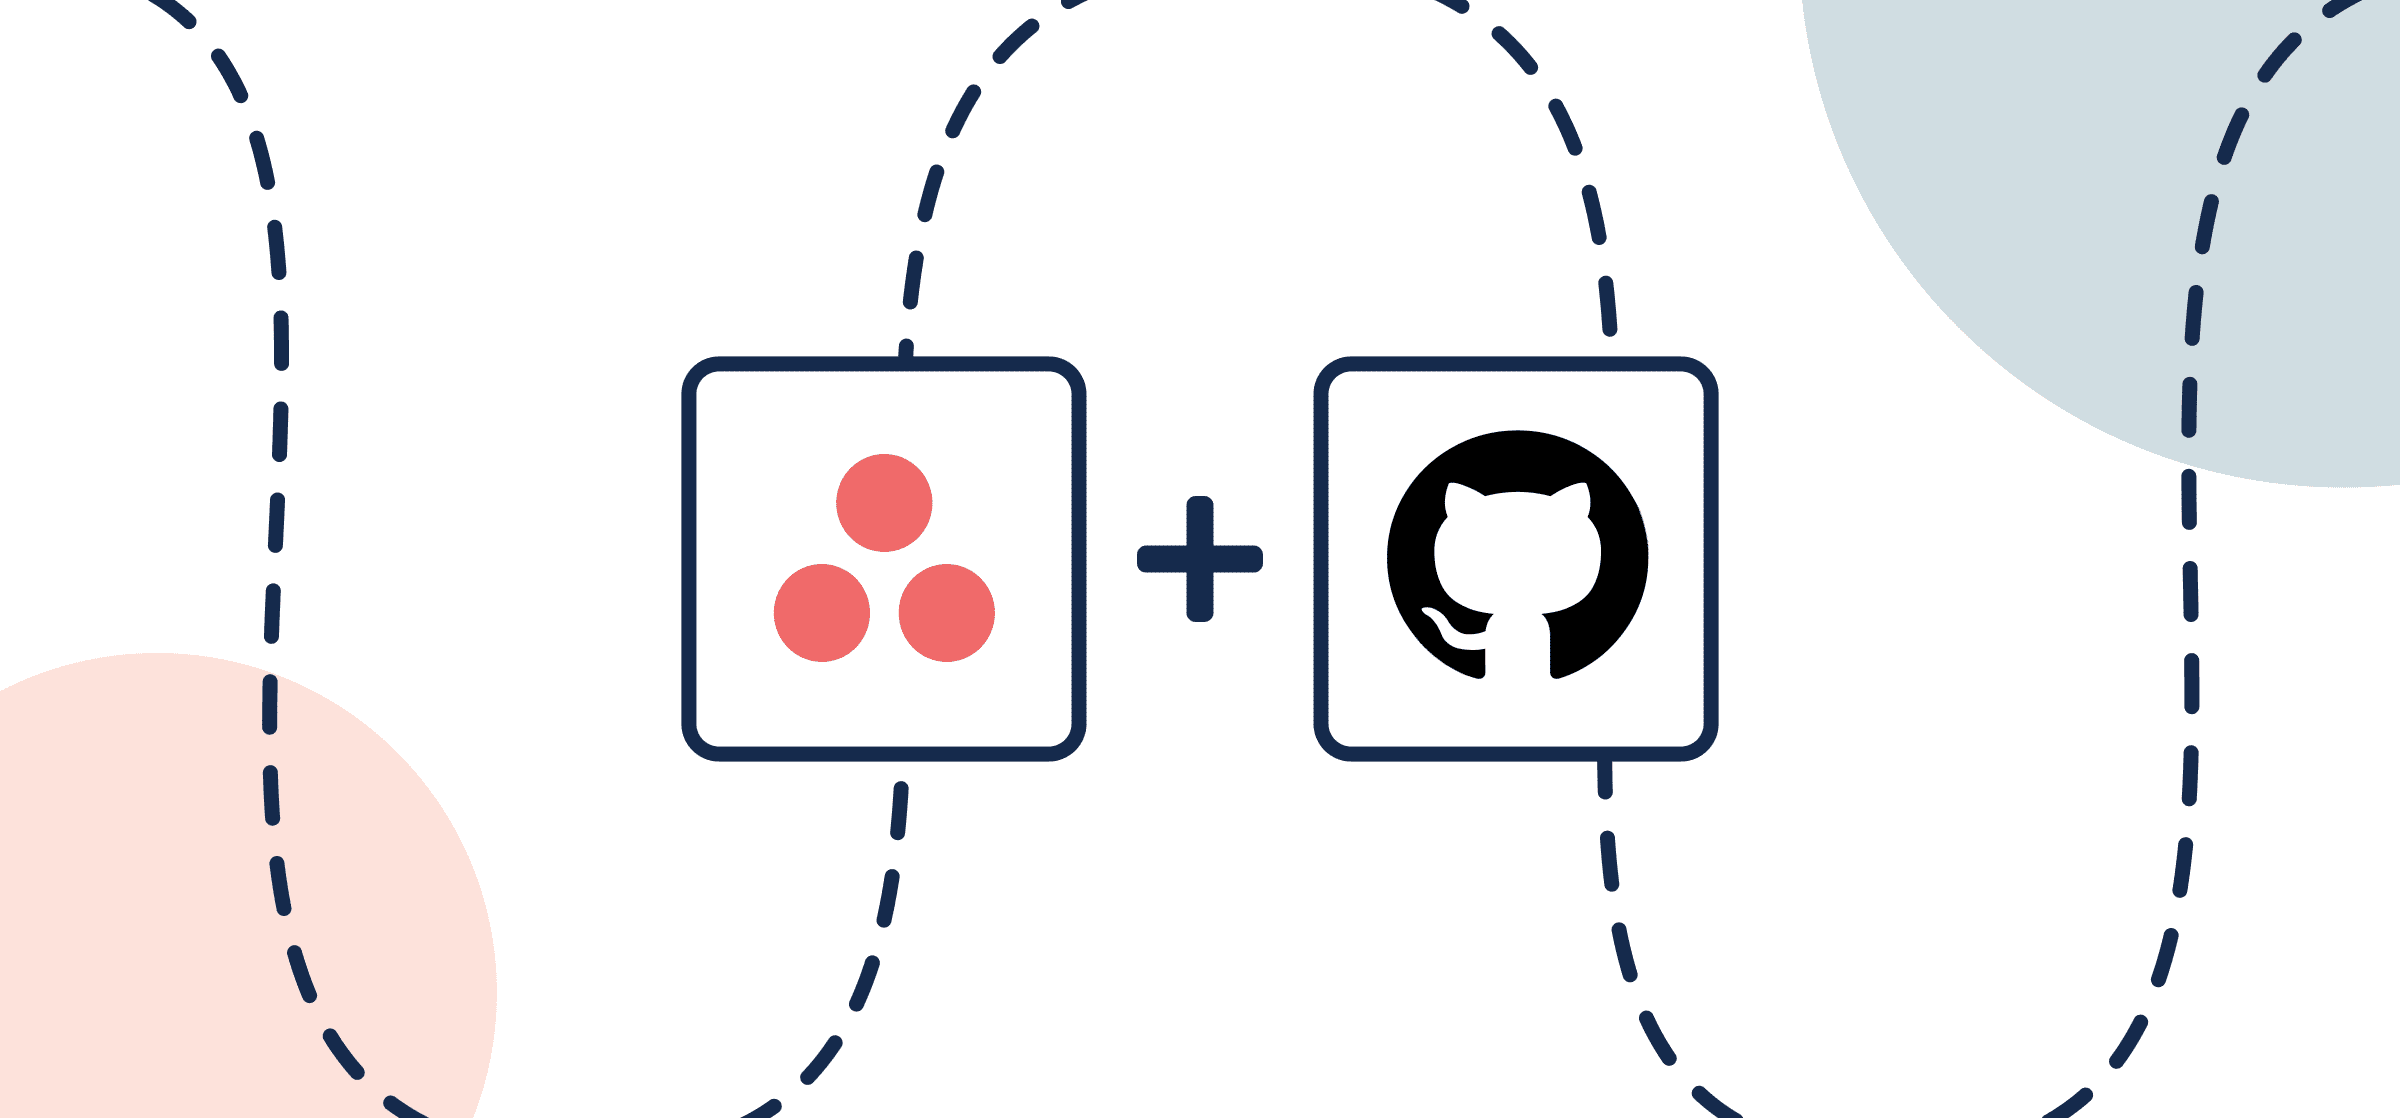 Featured image with Logos for Asana and GitHub, representing Unito's guide to syncing GitHub Issues to Asana tasks with a 2-way integration.